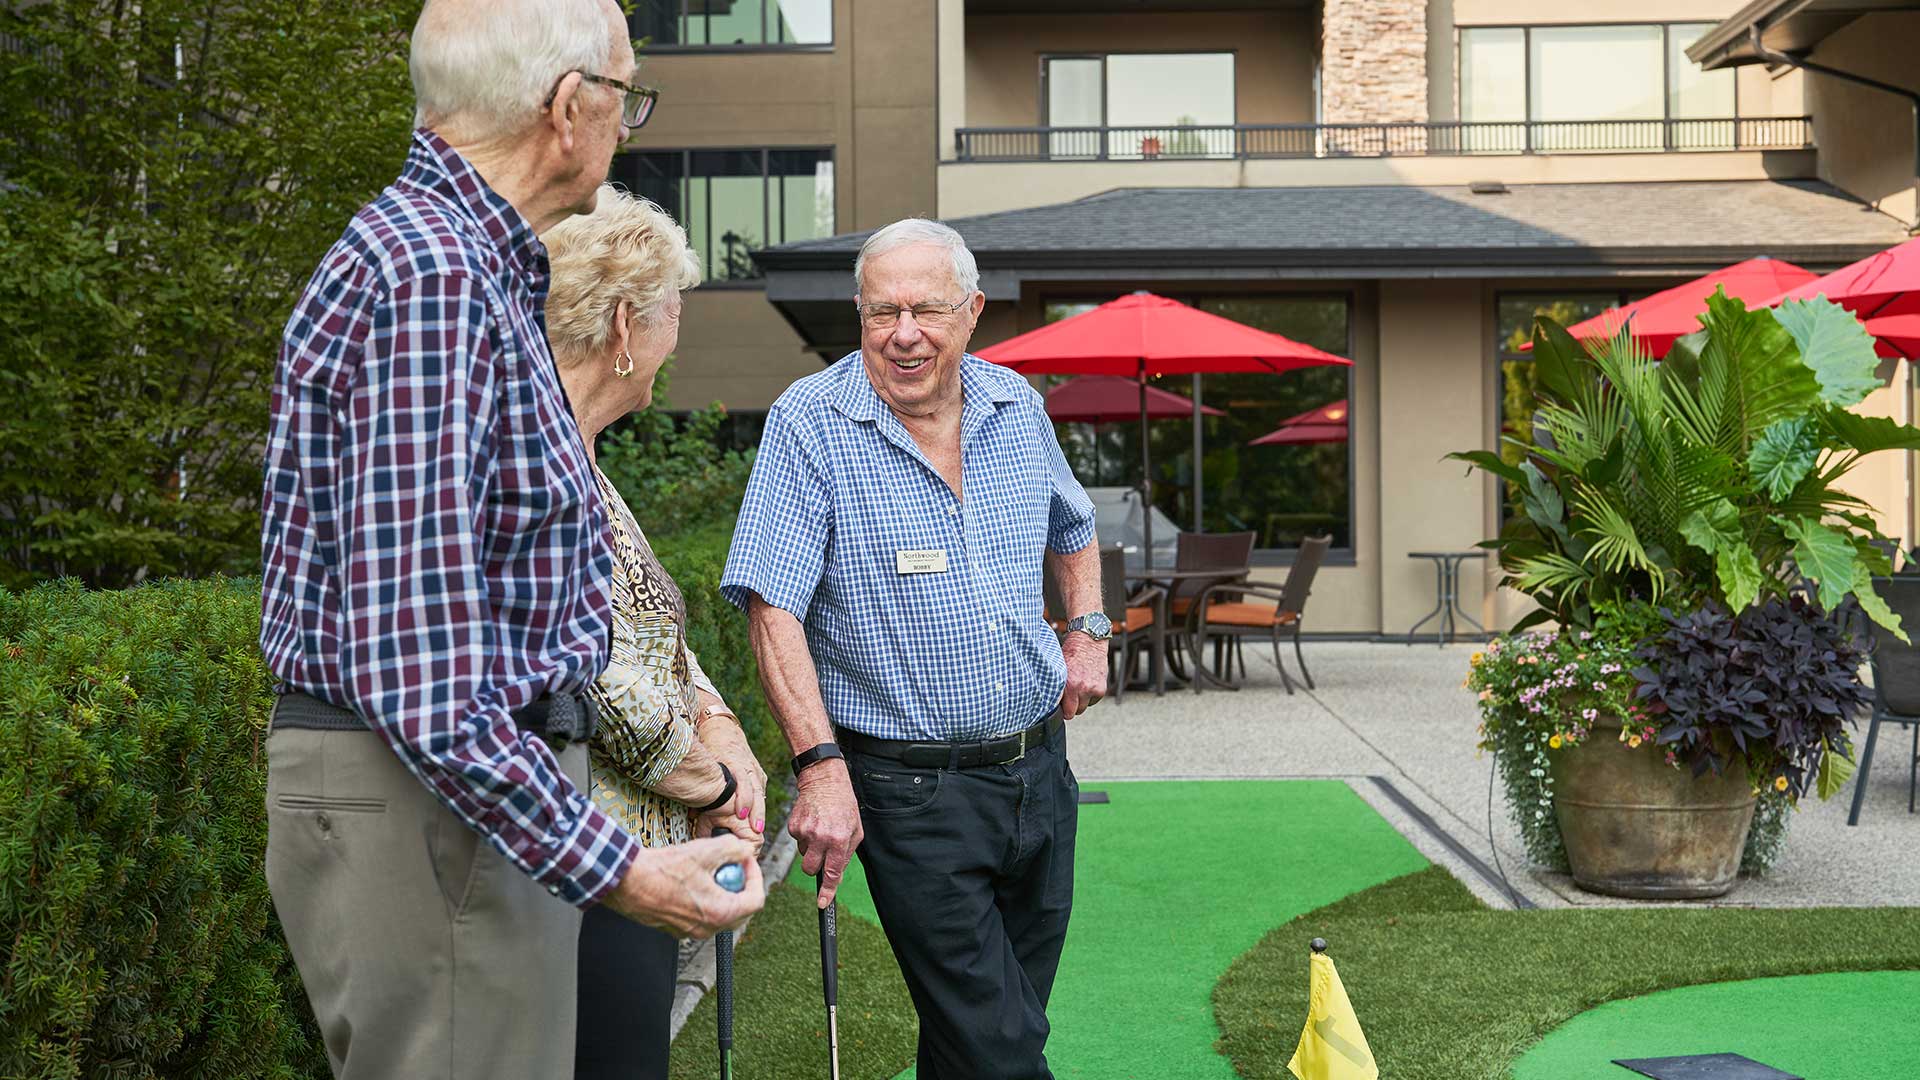 Elderly people playing golf outdoors